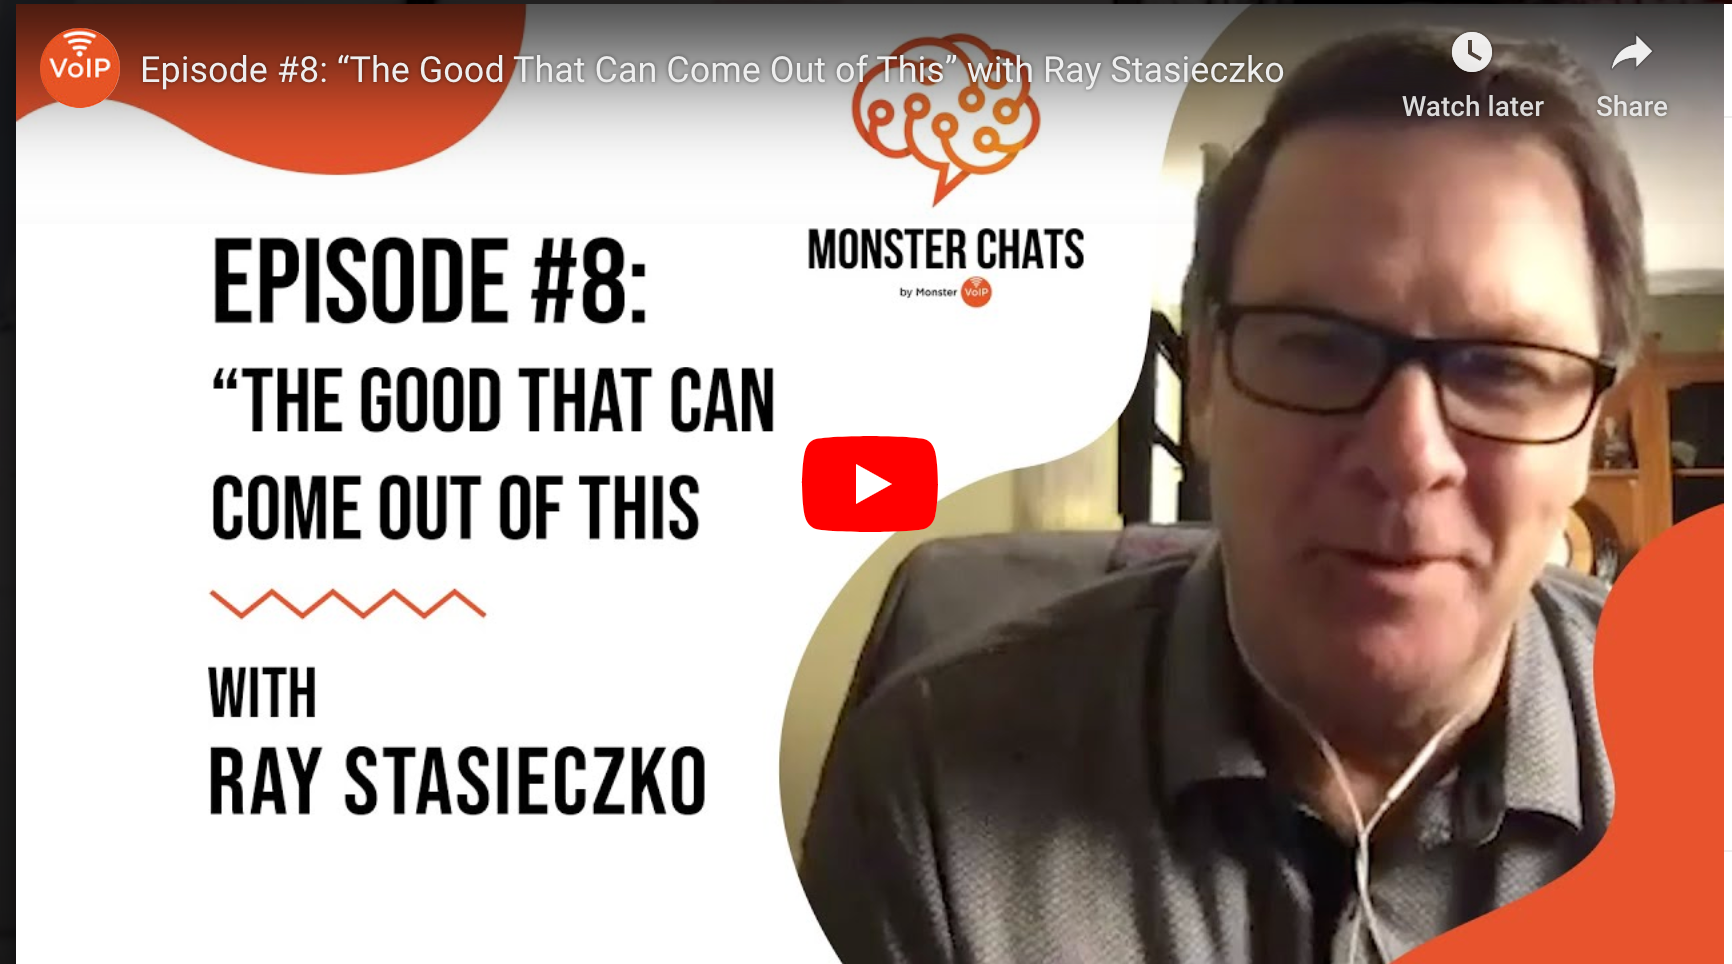 Episode #8: “The Good That Can Come Out of This” with Ray Stasieczko